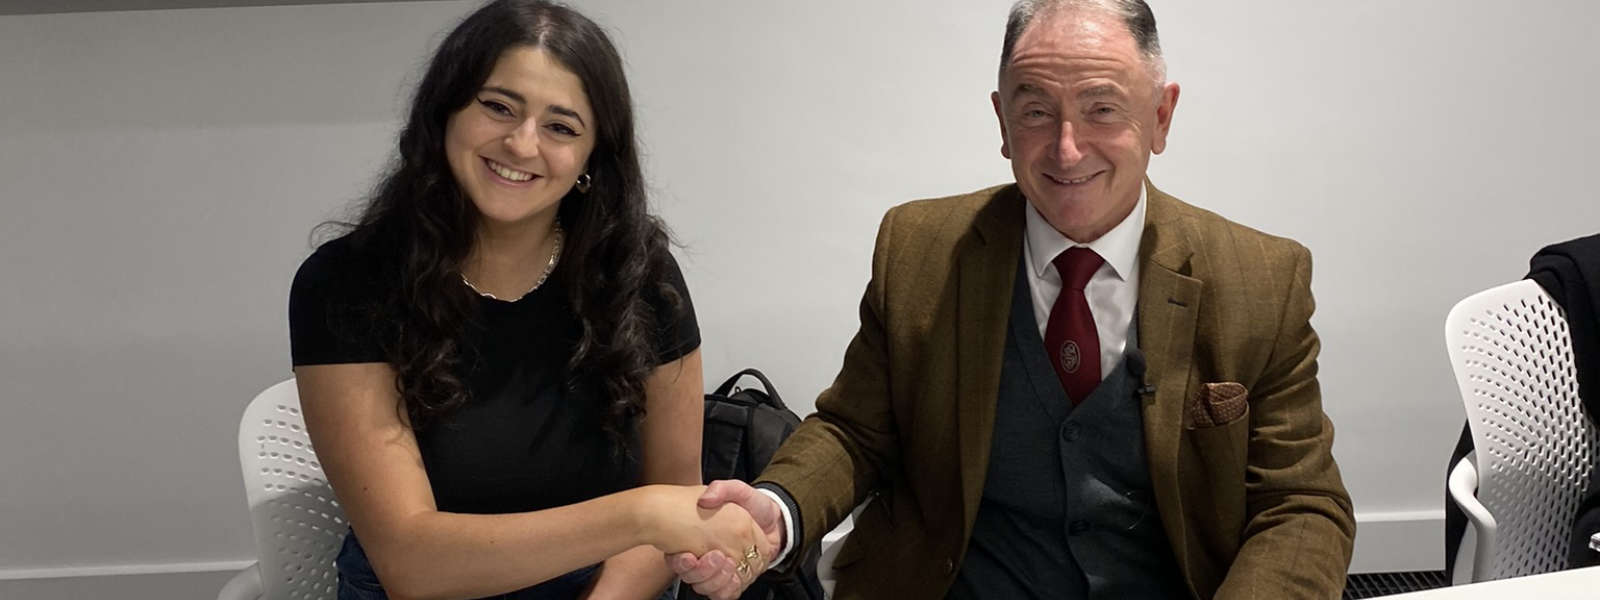 Strath Union President Eva Curran shakes hands with Professor Sir Jim McDonald, Principal of the University of Strathclyde